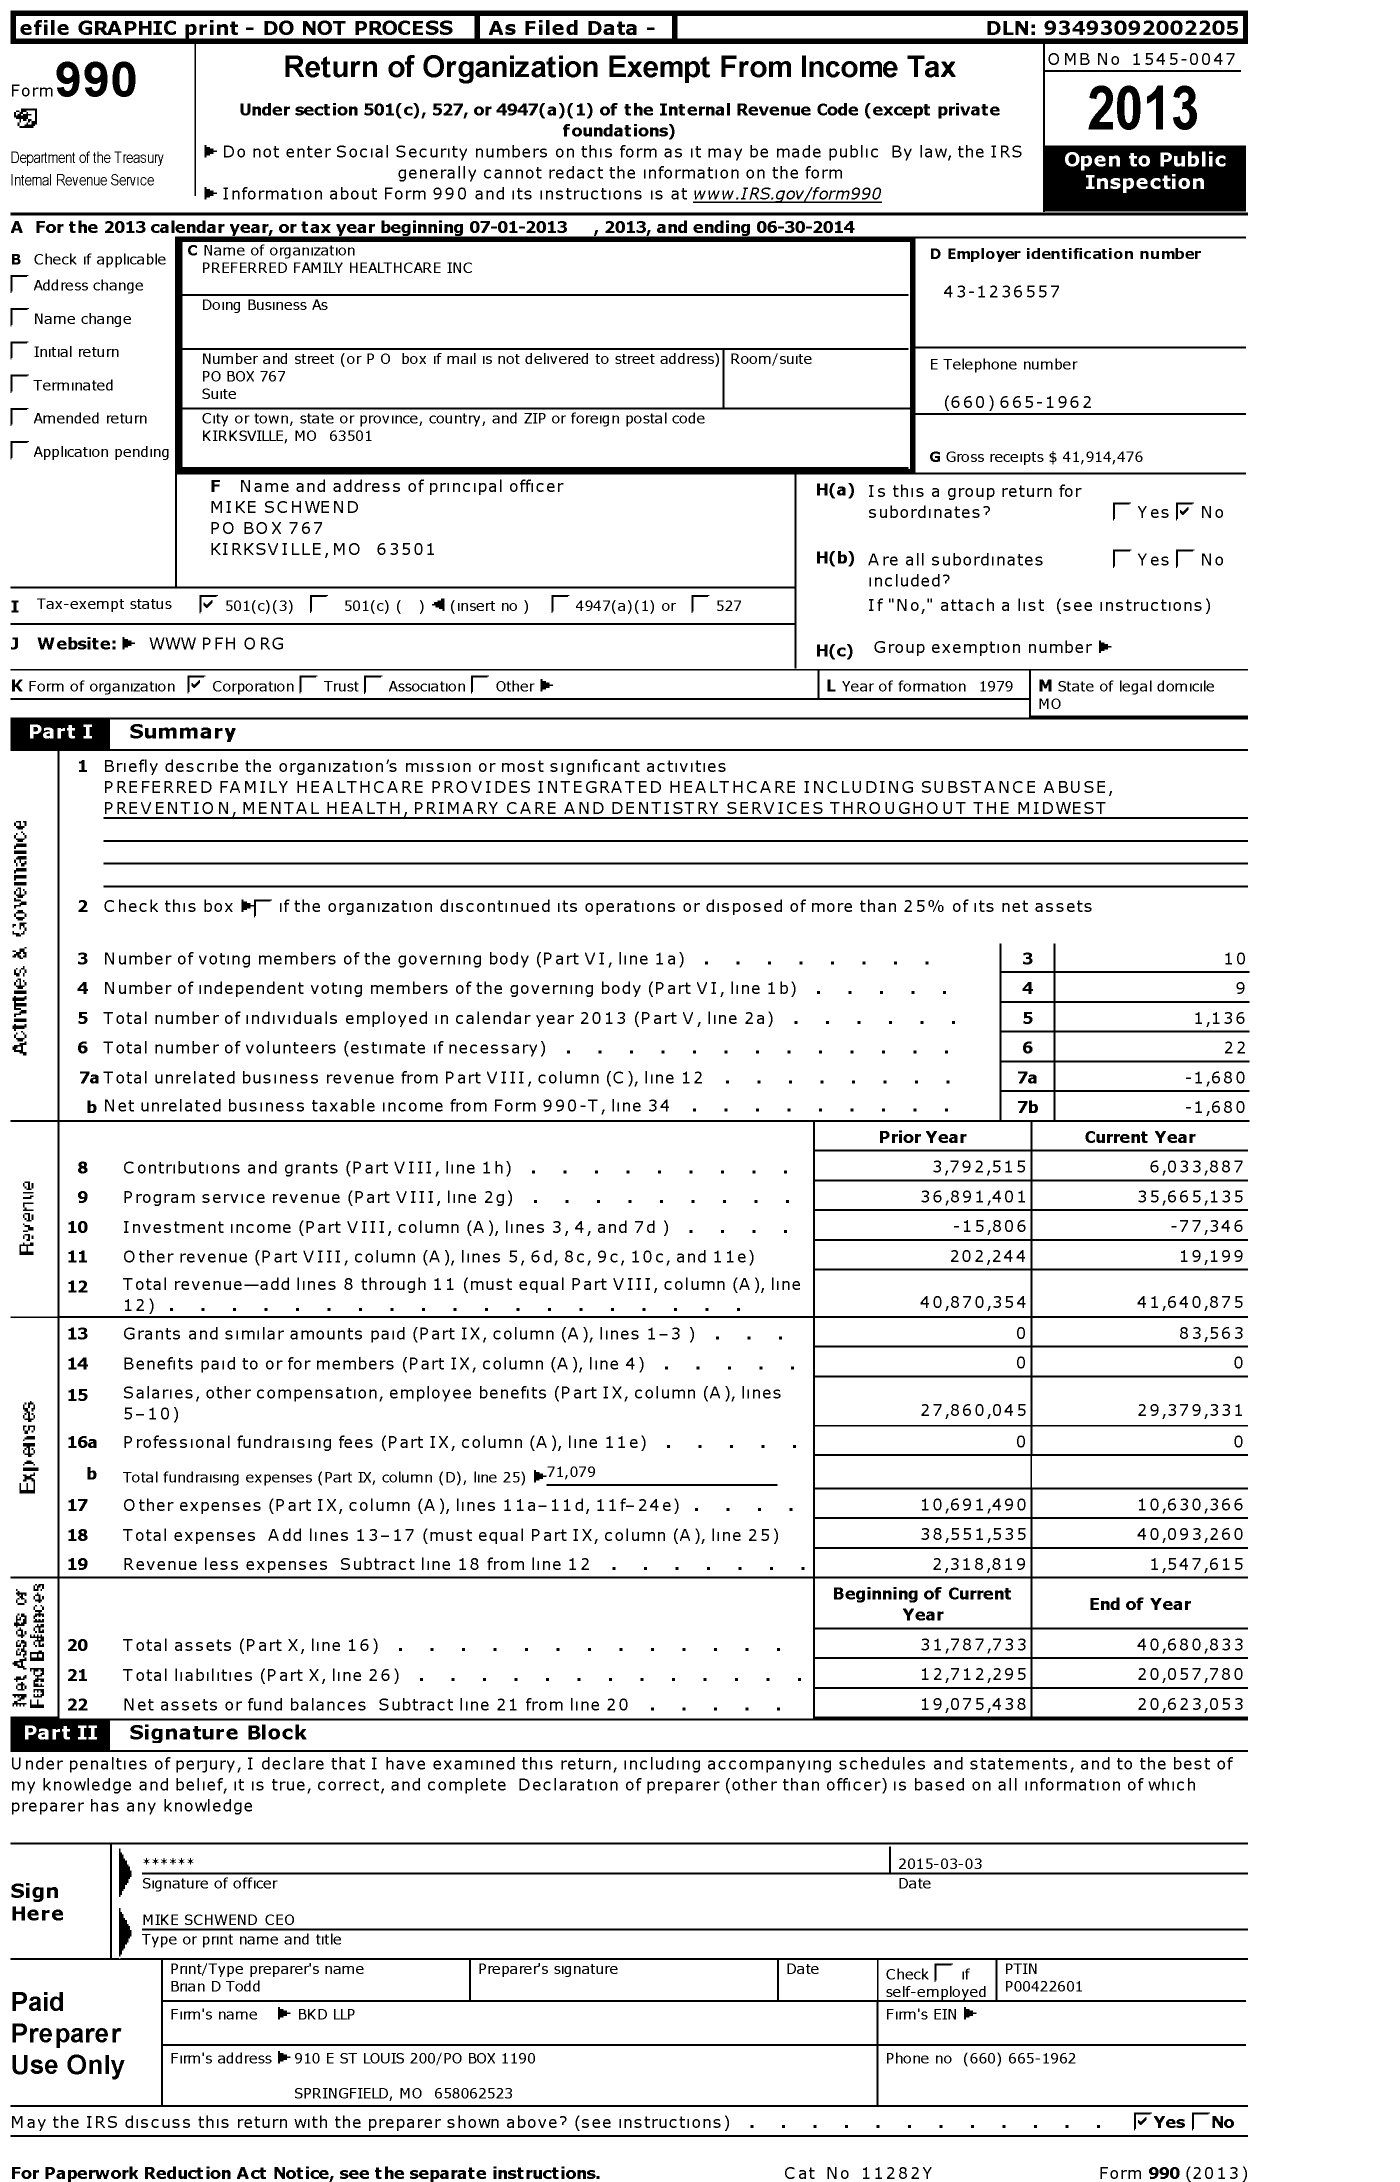 Image of first page of 2013 Form 990 for Preferred Family Healthcare (PFH)